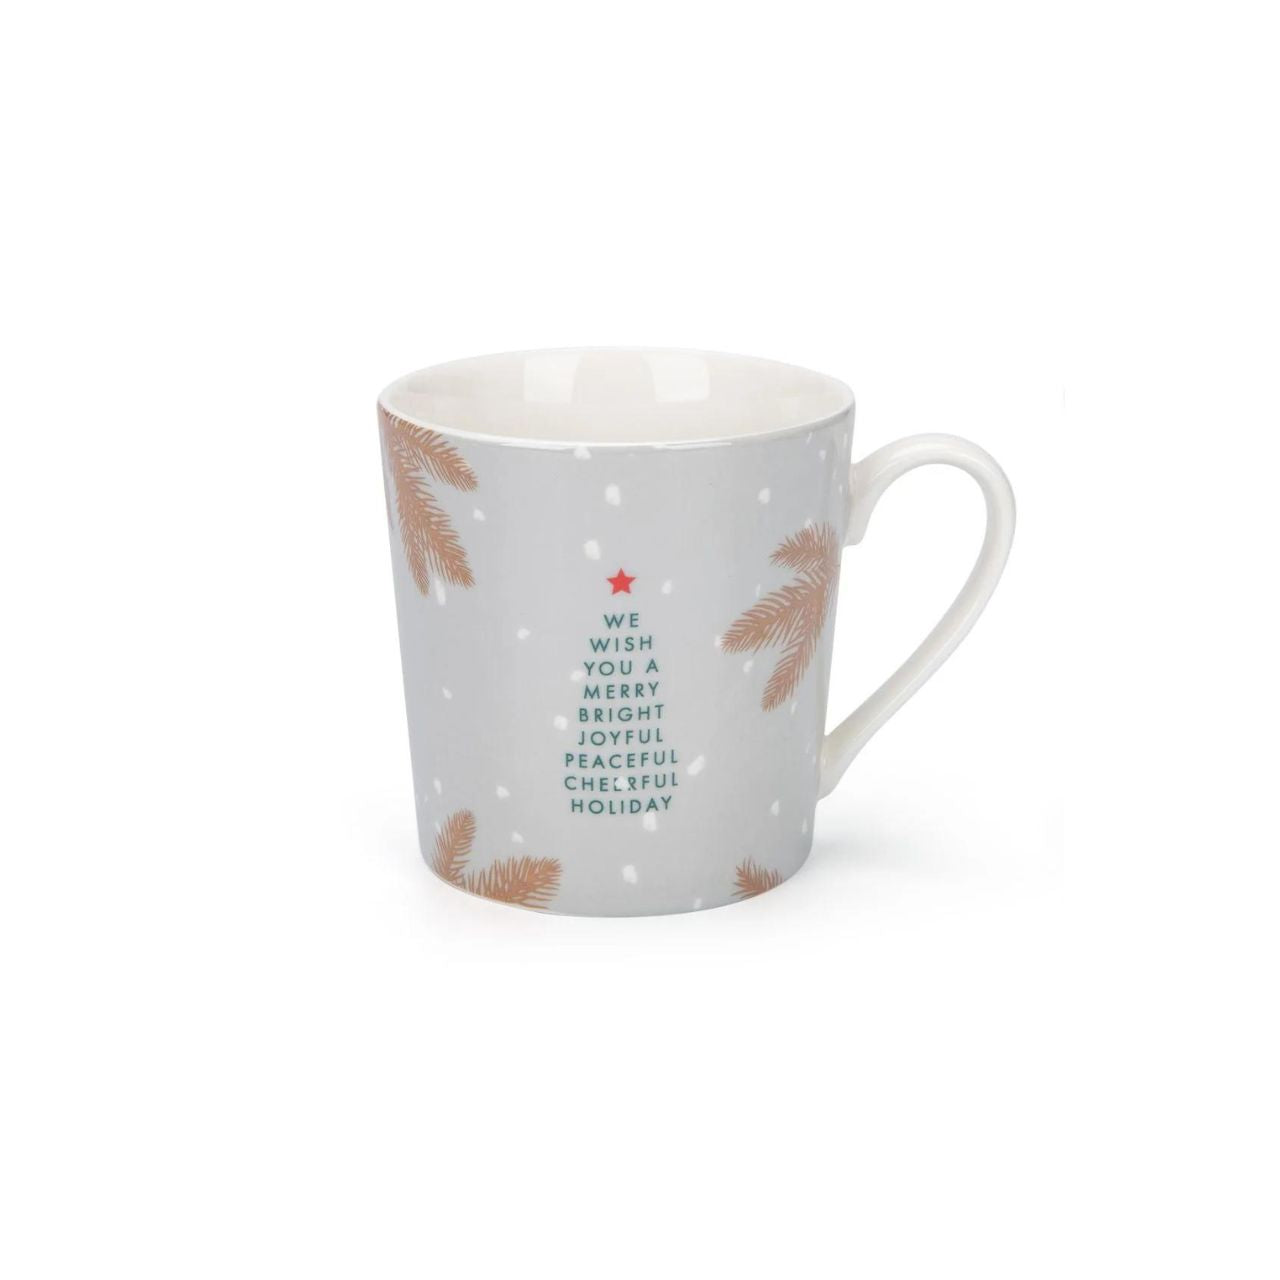 Christmas Festive Fir Set of 6 Mugs by Mindy Brownes Interiors  Introducing our Festive Fir collection. This charming collection is adorned with beautiful designs inspired by Christmas fir branches, red berries, and heart-warming holiday messages on green and white backgrounds.